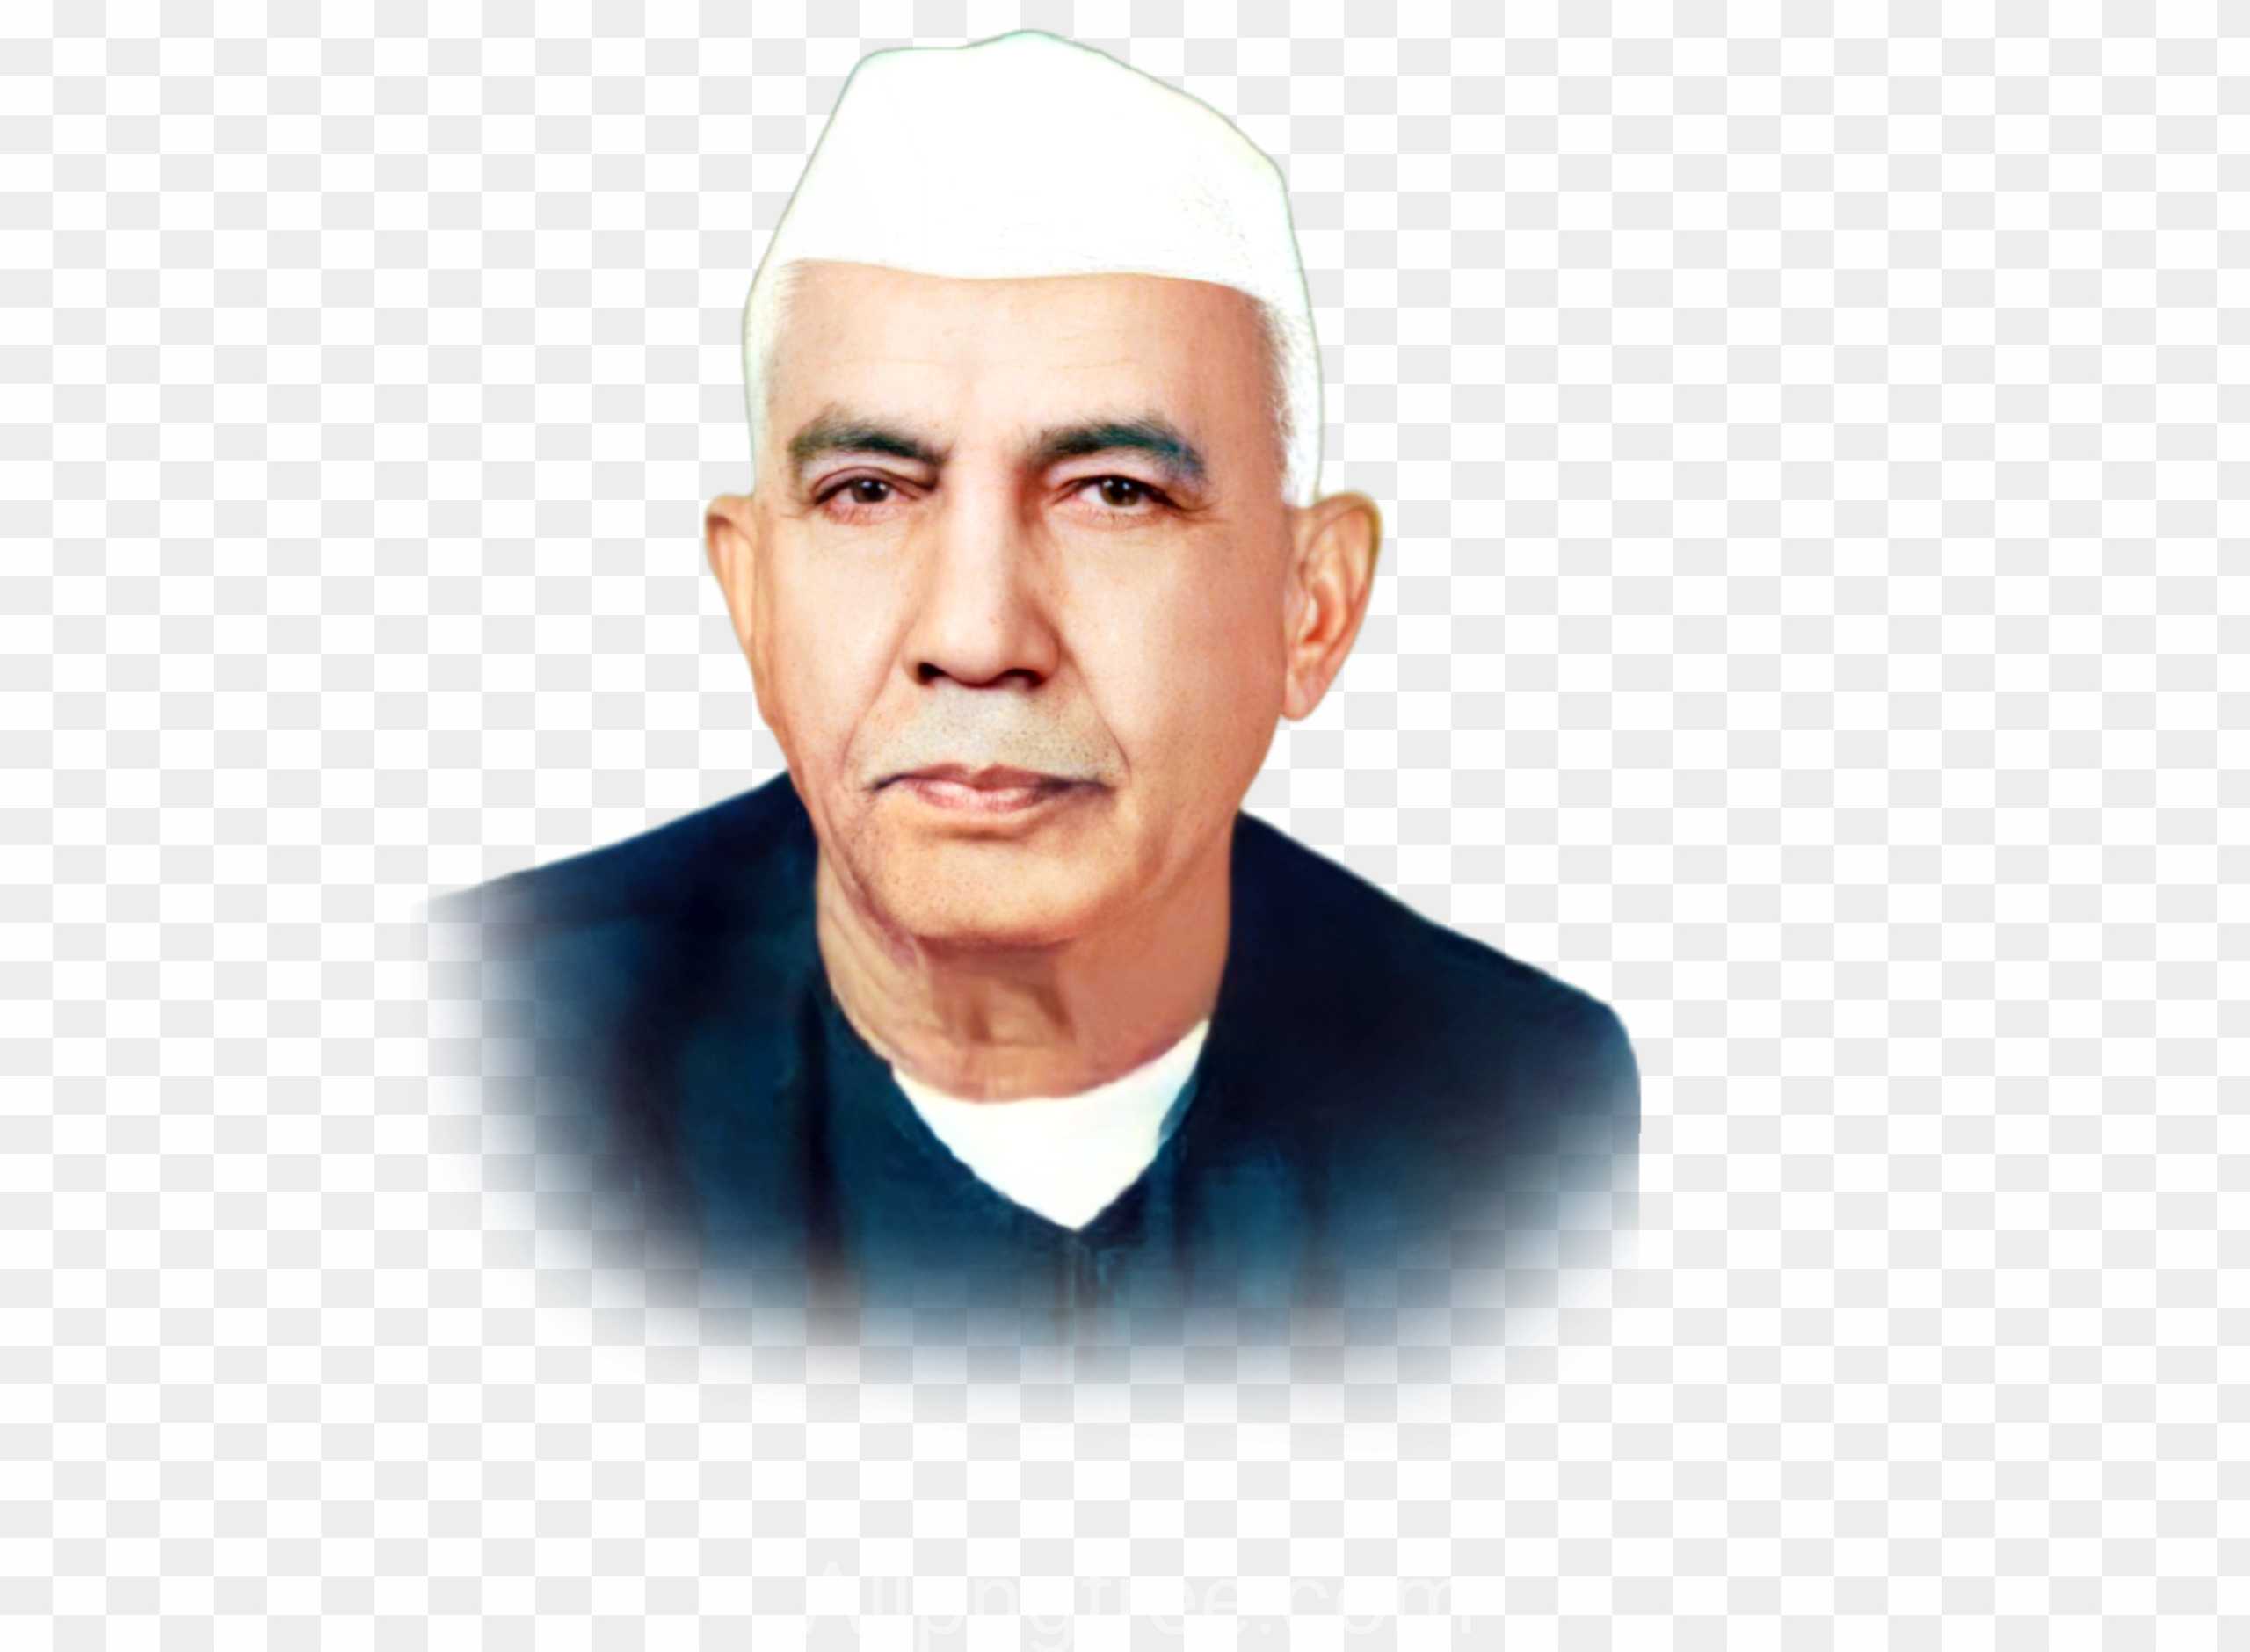 Chaudhary Charan Singh png images_ farmer day png download